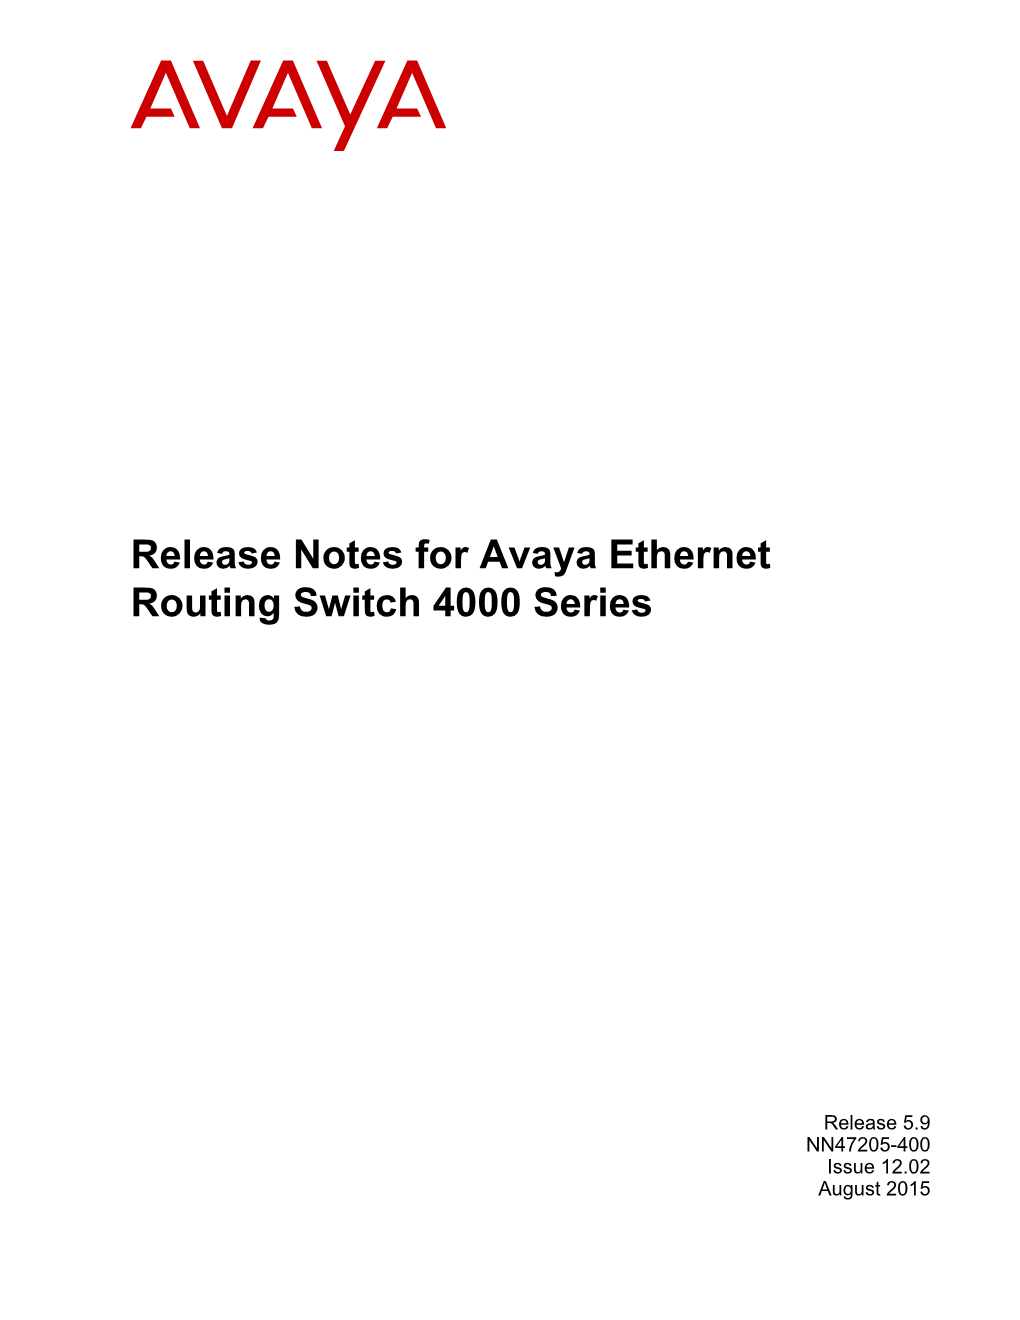 Release Notes for Avaya Ethernet Routing Switch 4000 Series